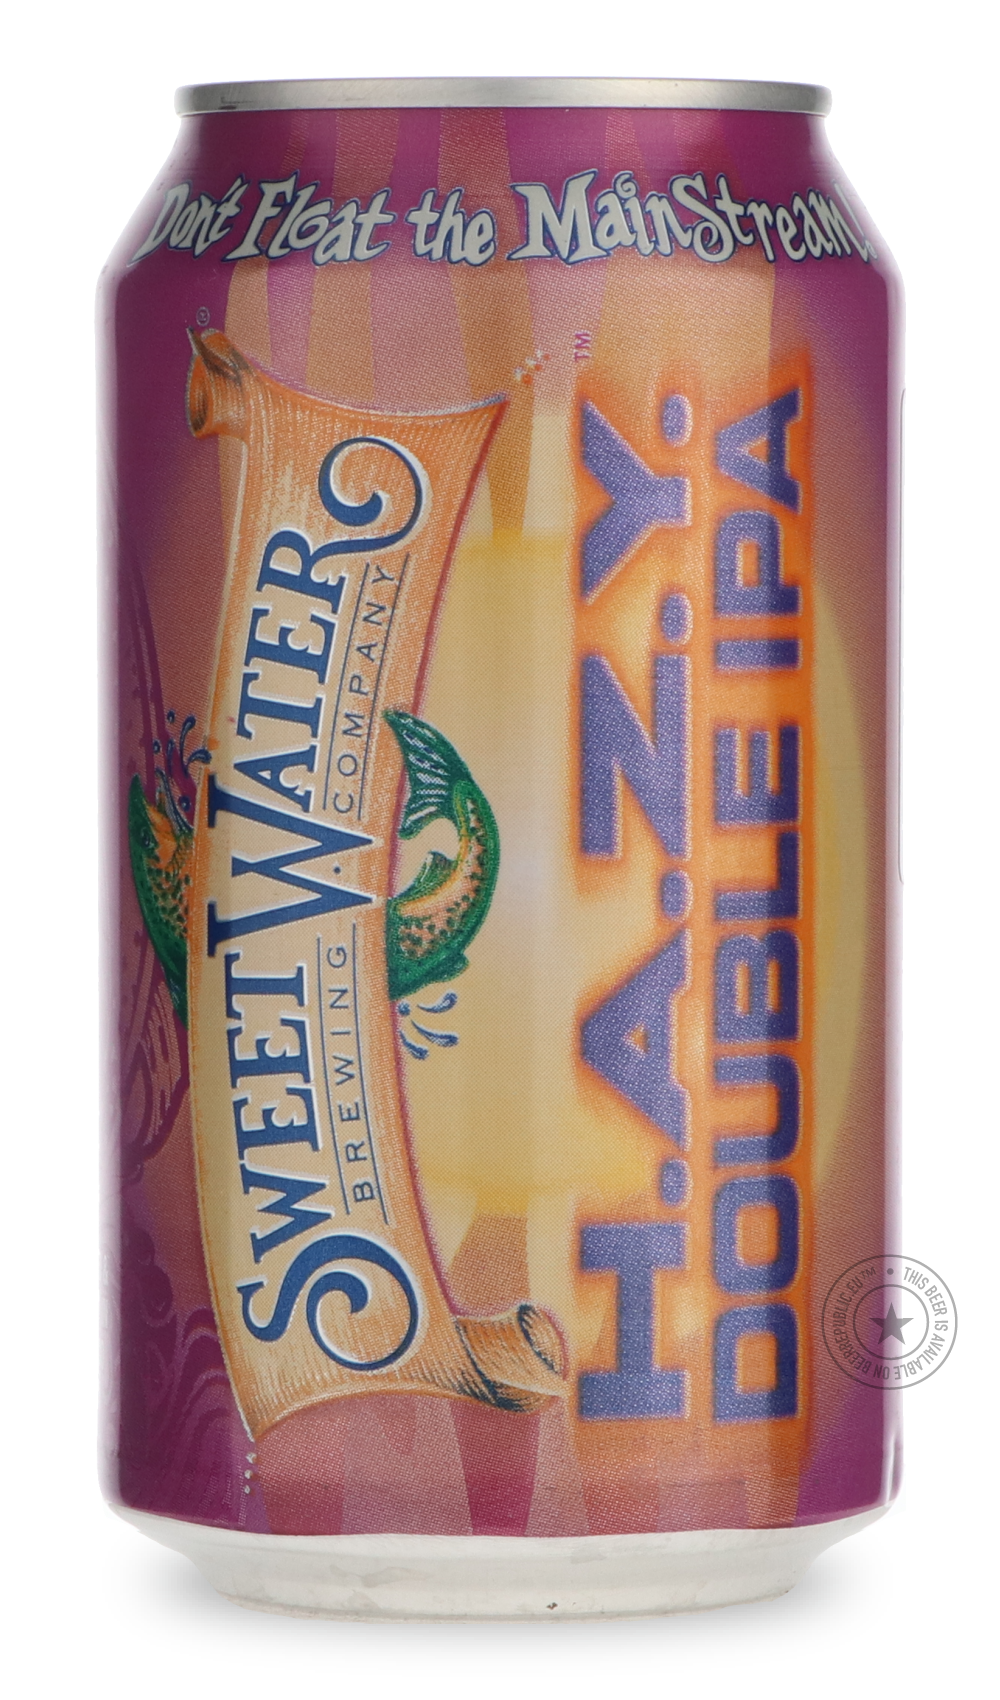 -SweetWater- H.A.Z.Y. Double IPA-IPA- Only @ Beer Republic - The best online beer store for American & Canadian craft beer - Buy beer online from the USA and Canada - Bier online kopen - Amerikaans bier kopen - Craft beer store - Craft beer kopen - Amerikanisch bier kaufen - Bier online kaufen - Acheter biere online - IPA - Stout - Porter - New England IPA - Hazy IPA - Imperial Stout - Barrel Aged - Barrel Aged Imperial Stout - Brown - Dark beer - Blond - Blonde - Pilsner - Lager - Wheat - Weizen - Amber - 